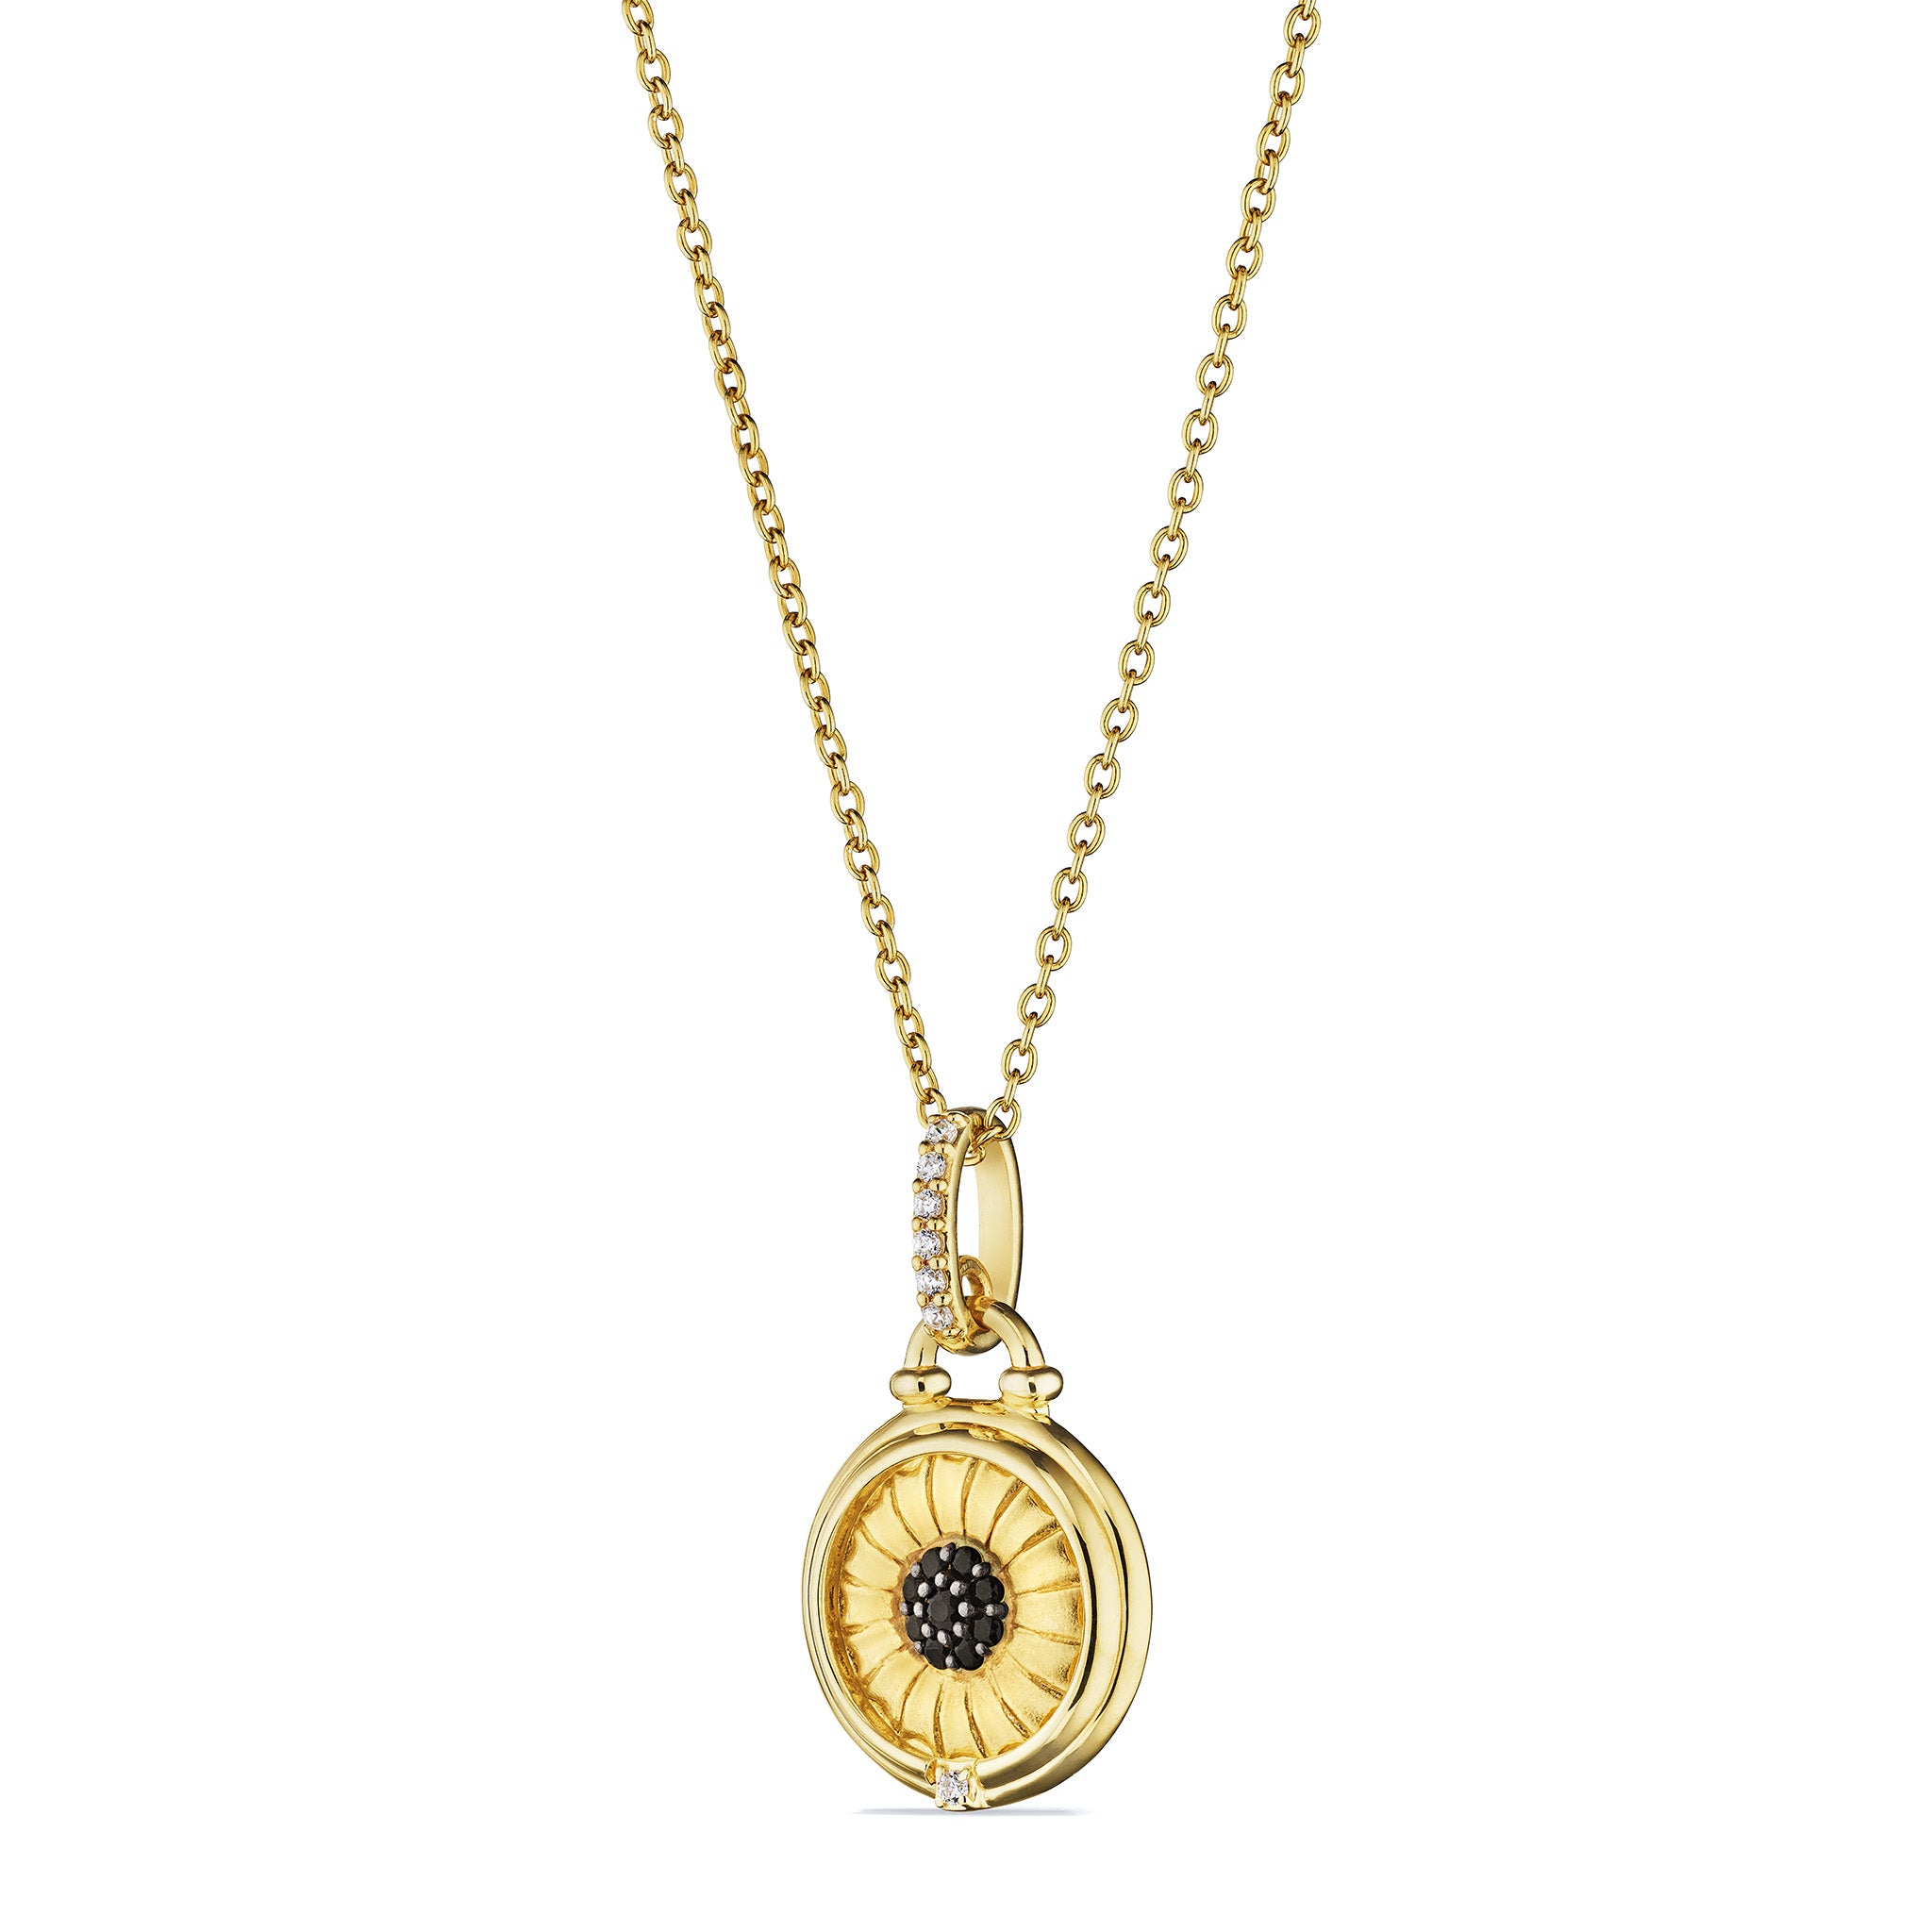 Little Luxuries Sunflower Medallion Necklace with Black Spinel and Diamonds in 18K